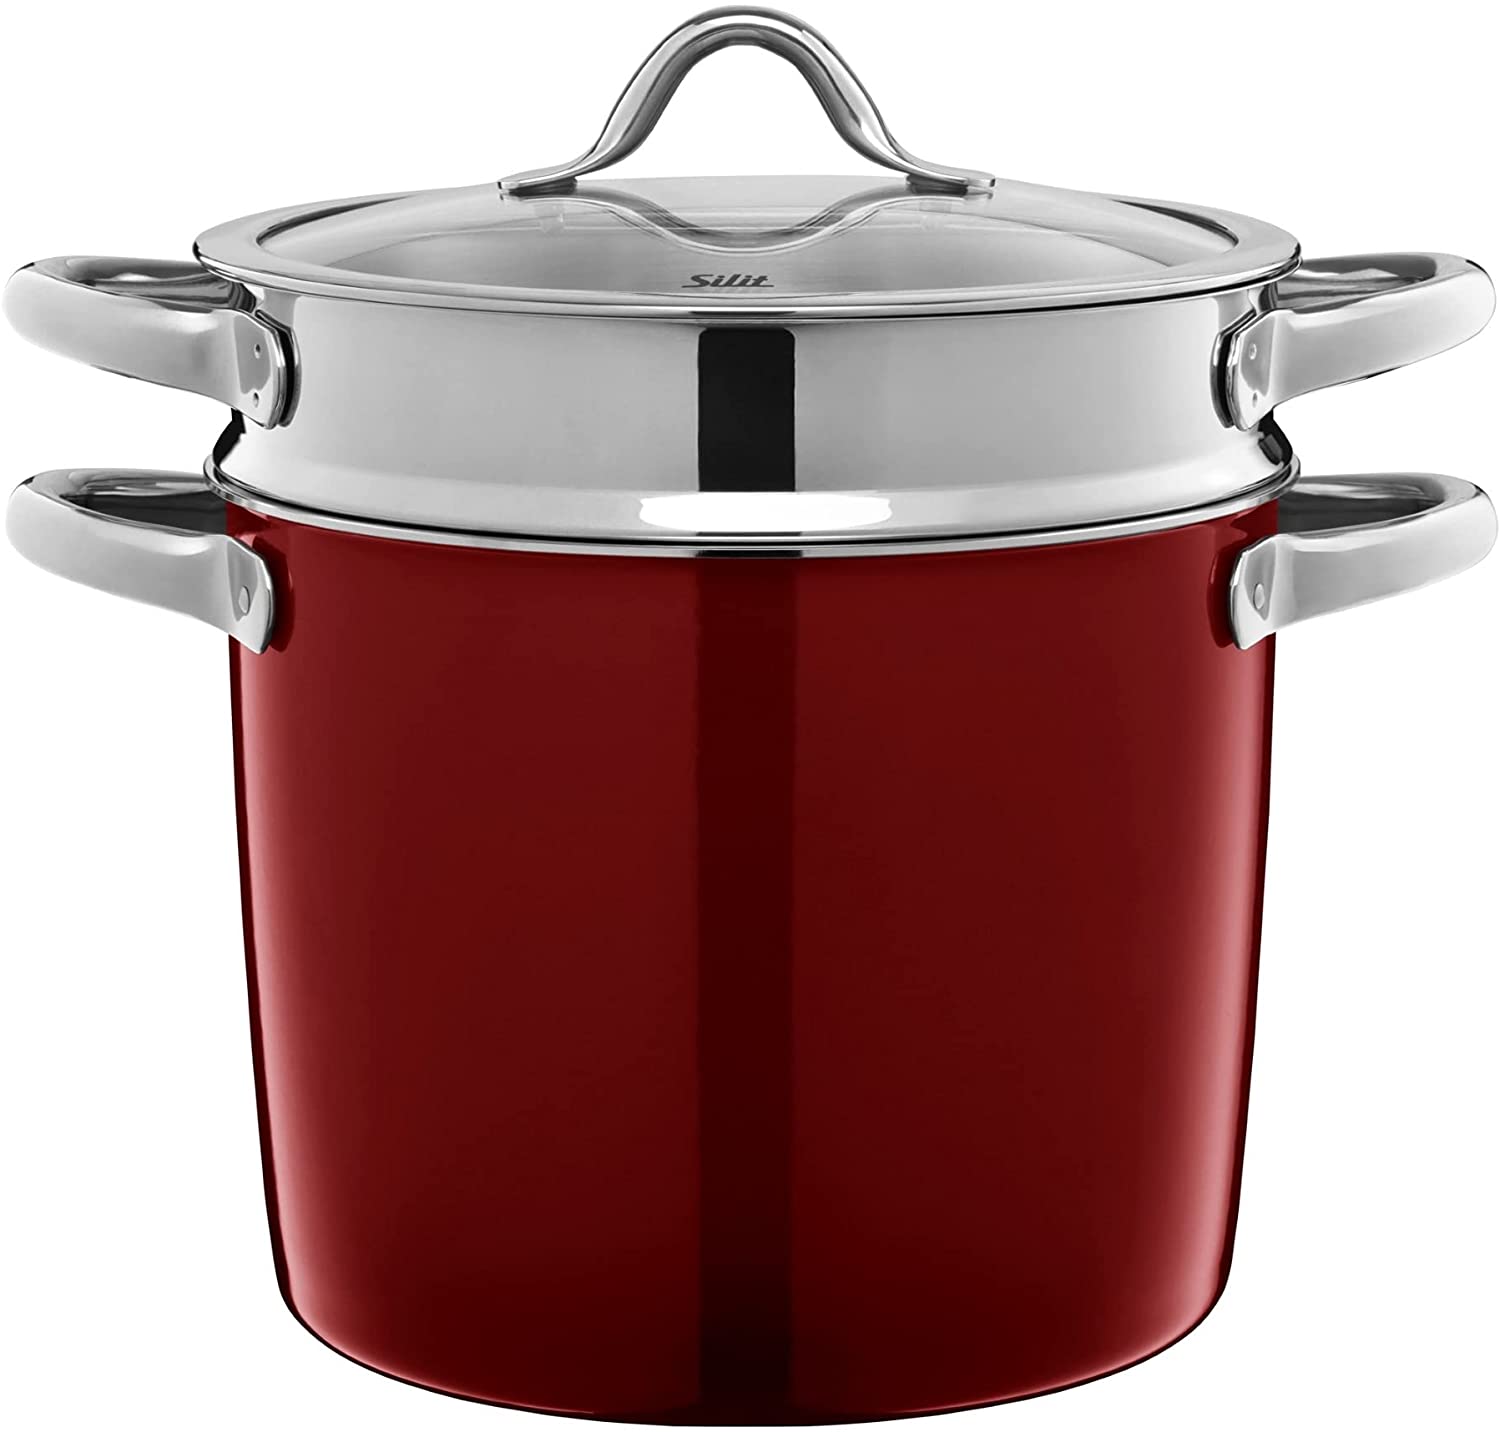 Silit Vitaliano Rosso Pasta Pot with Strainer Insert 24 cm Glass Lid Saucepan High 8.5 L Silargan Functional Ceramic Pot Induction Dark Red